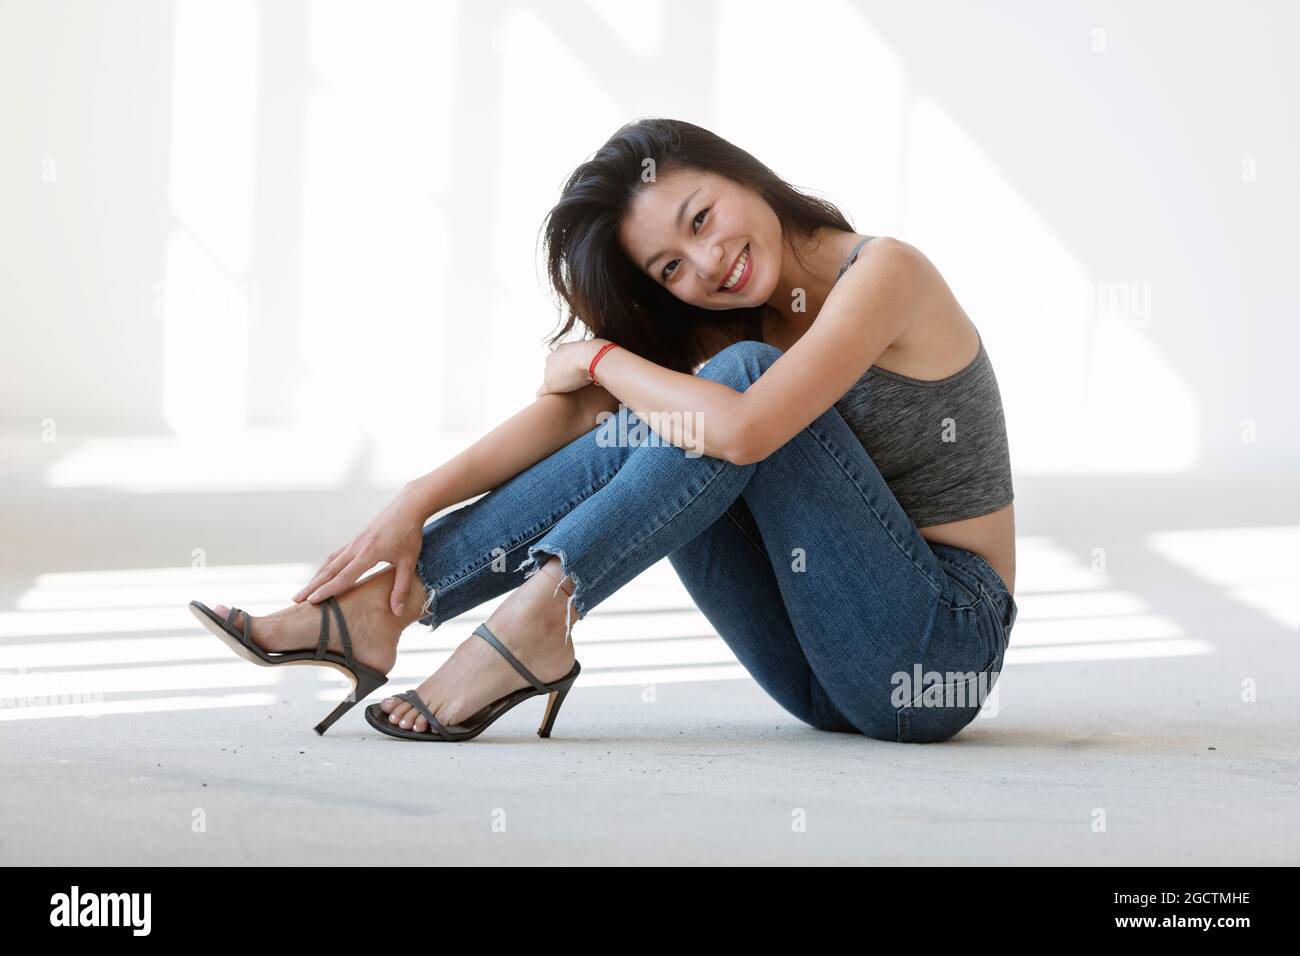 Portrait beautiful Asian girl sitting on the ground. She is wearing blue jeans, a sporty top and stiletto heels. Behind comes the sunlight. Stock Photo